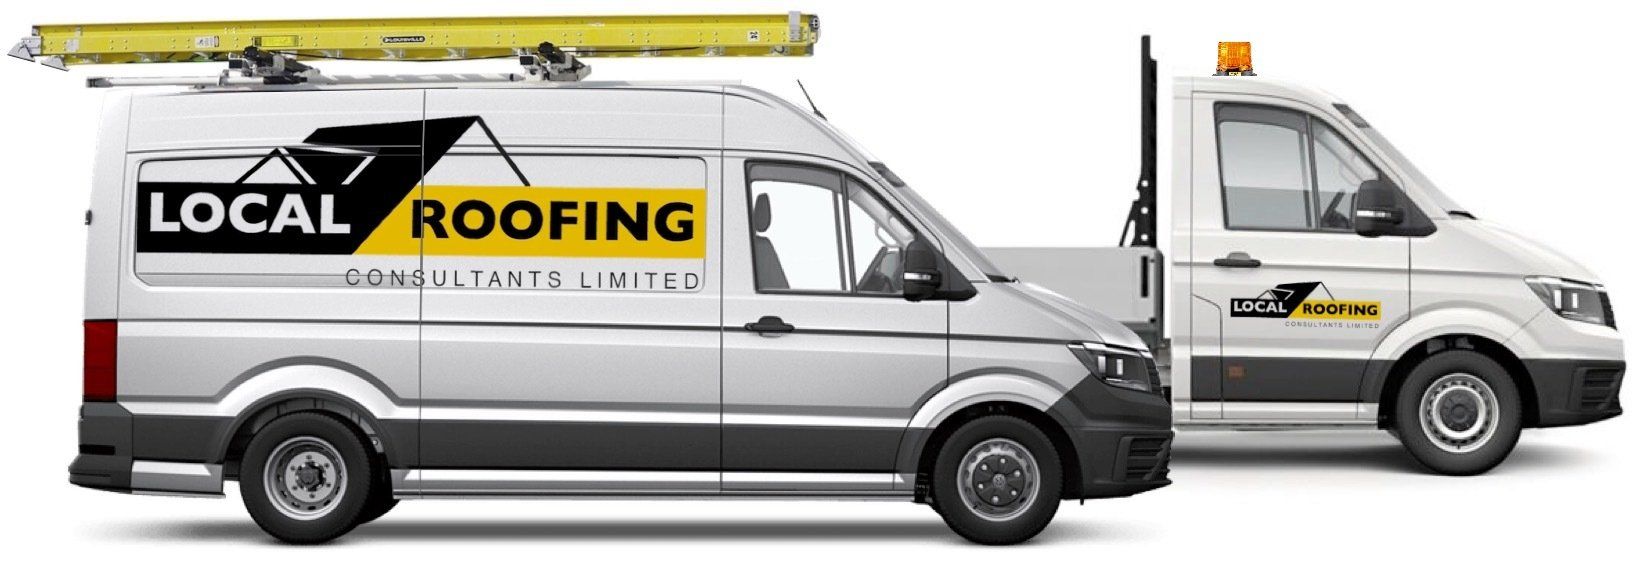 Local Roofing Consultants Limited work in Finsbury Park and throughout the London area